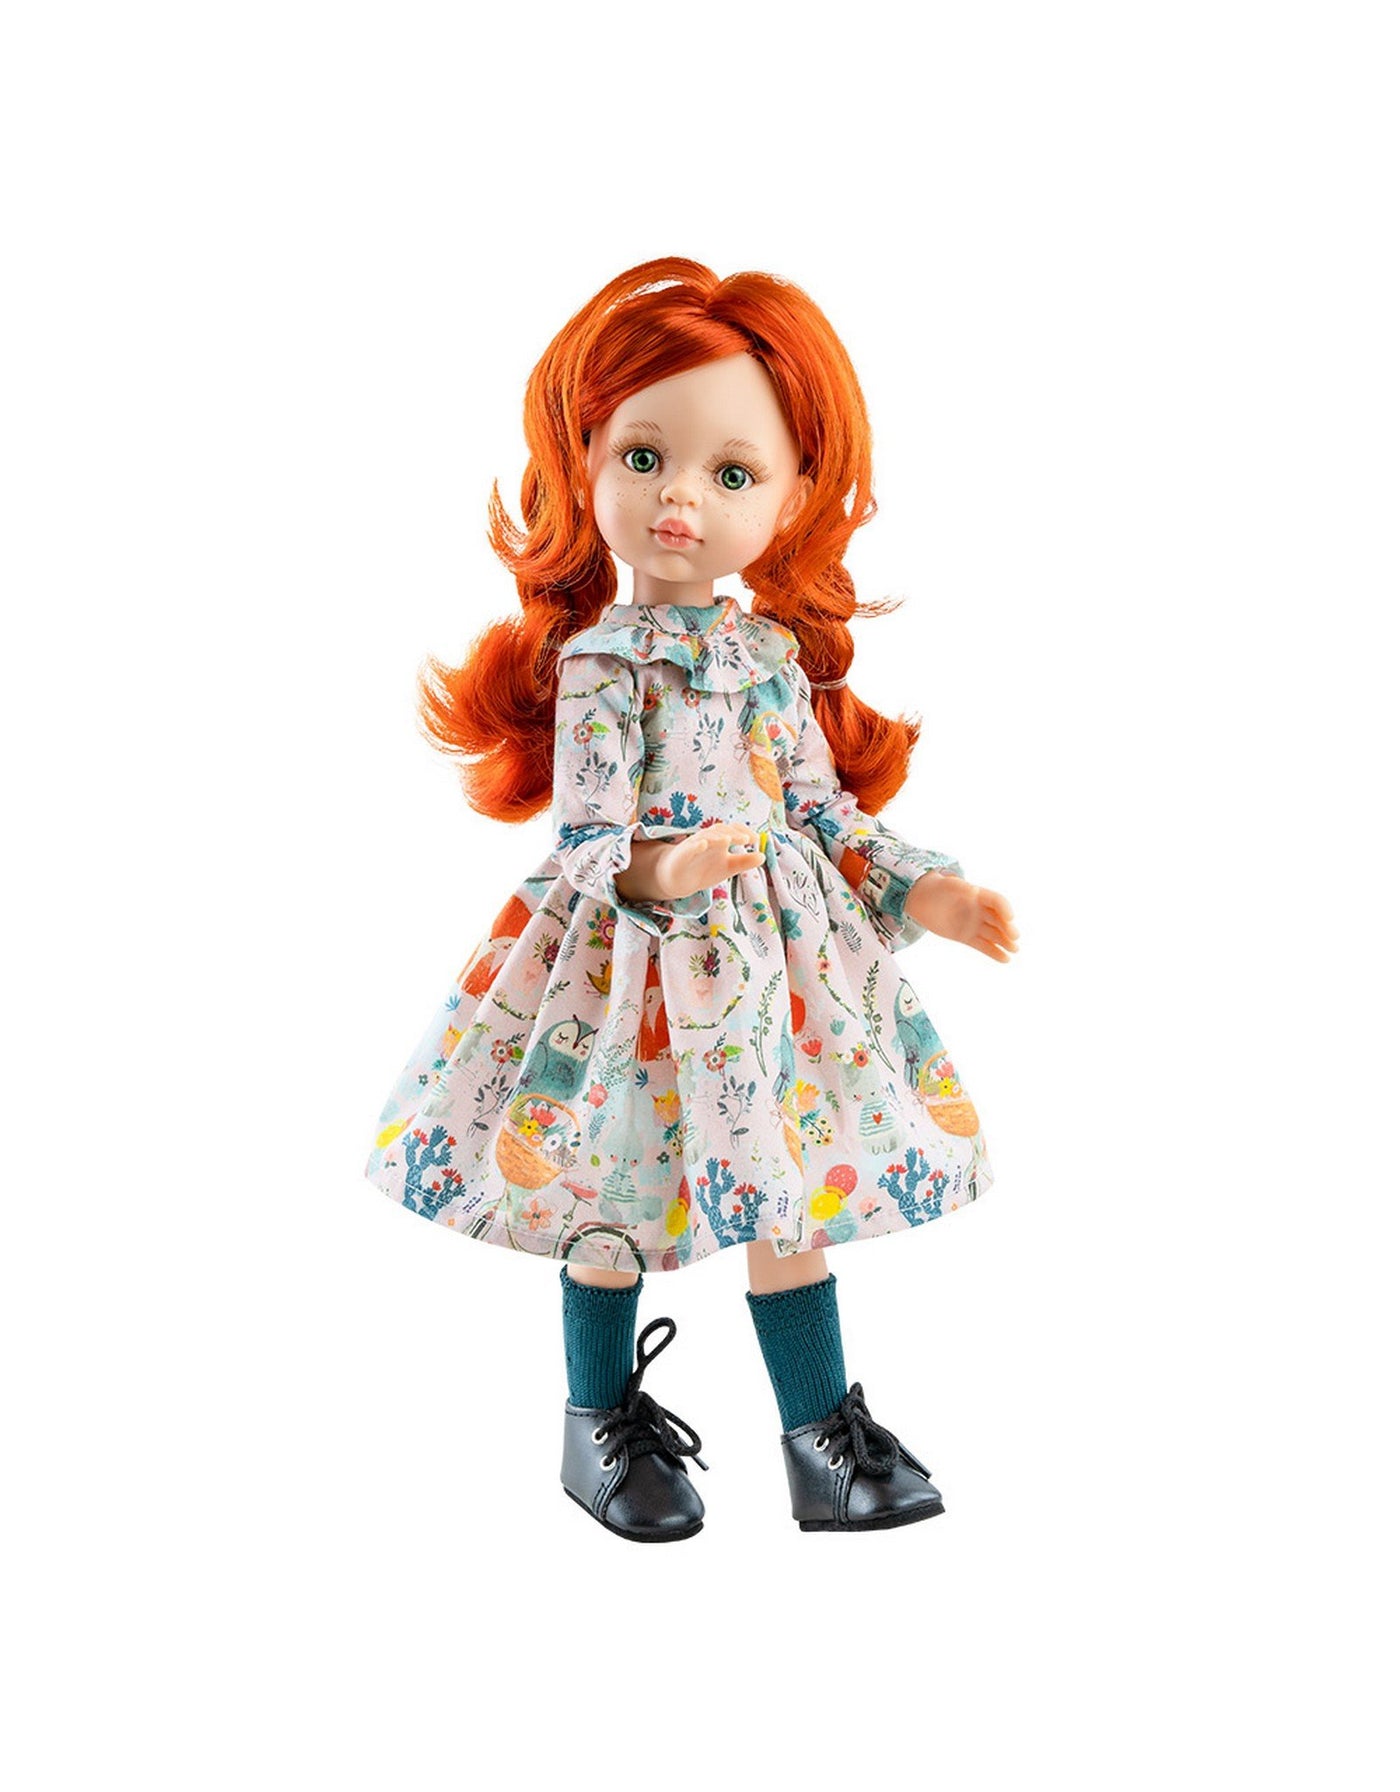 Las Amigas Doll Clothing - Walk in the Forest dress - Paola Reina